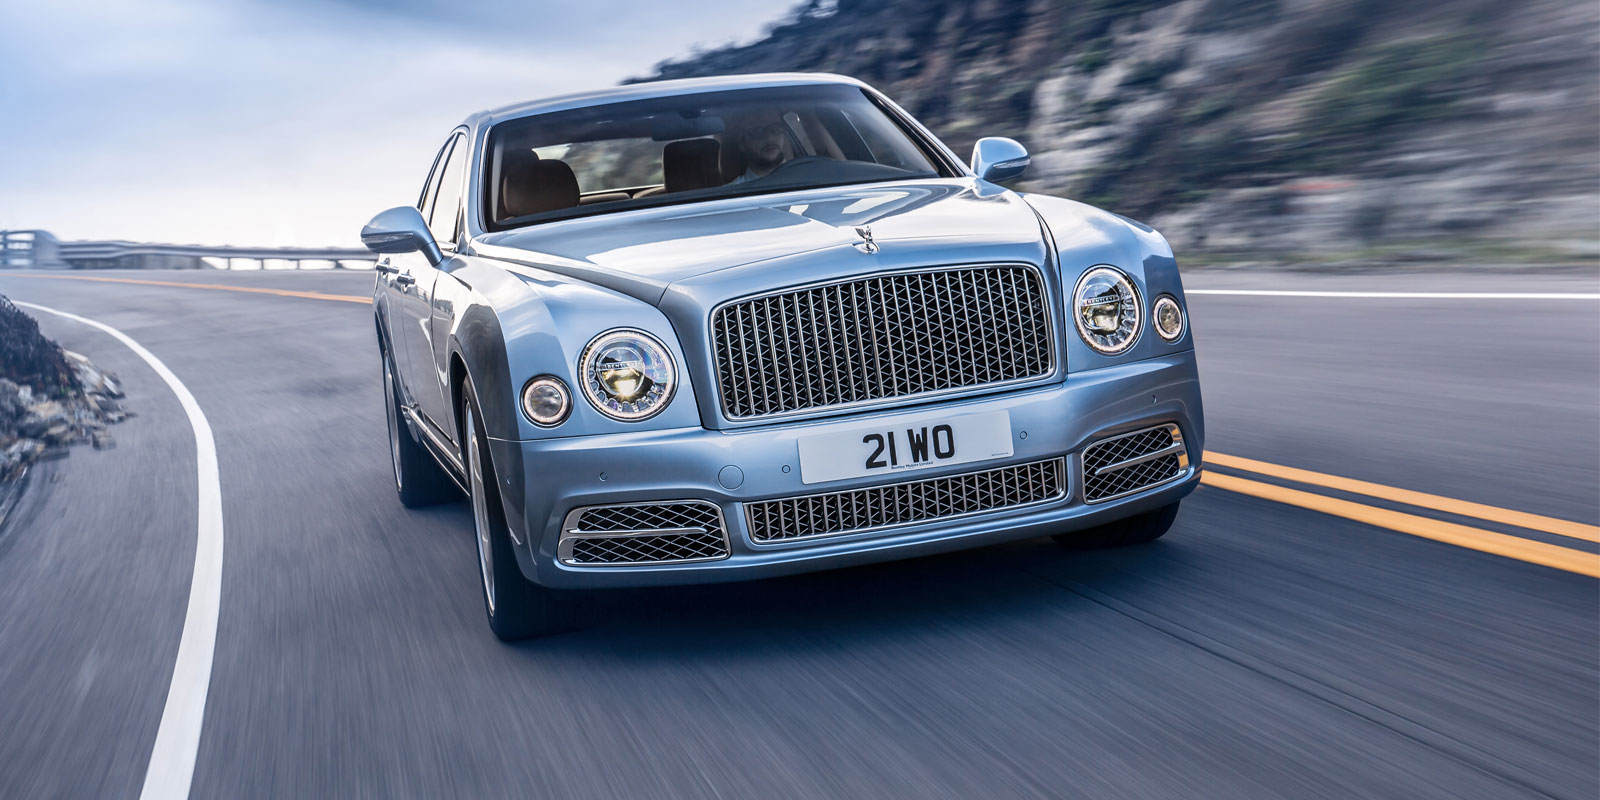 Used 2019 Bentley Mulsanne Speed For Sale ($229,995) | Exclusive Automotive  Group Stock #23N009468A